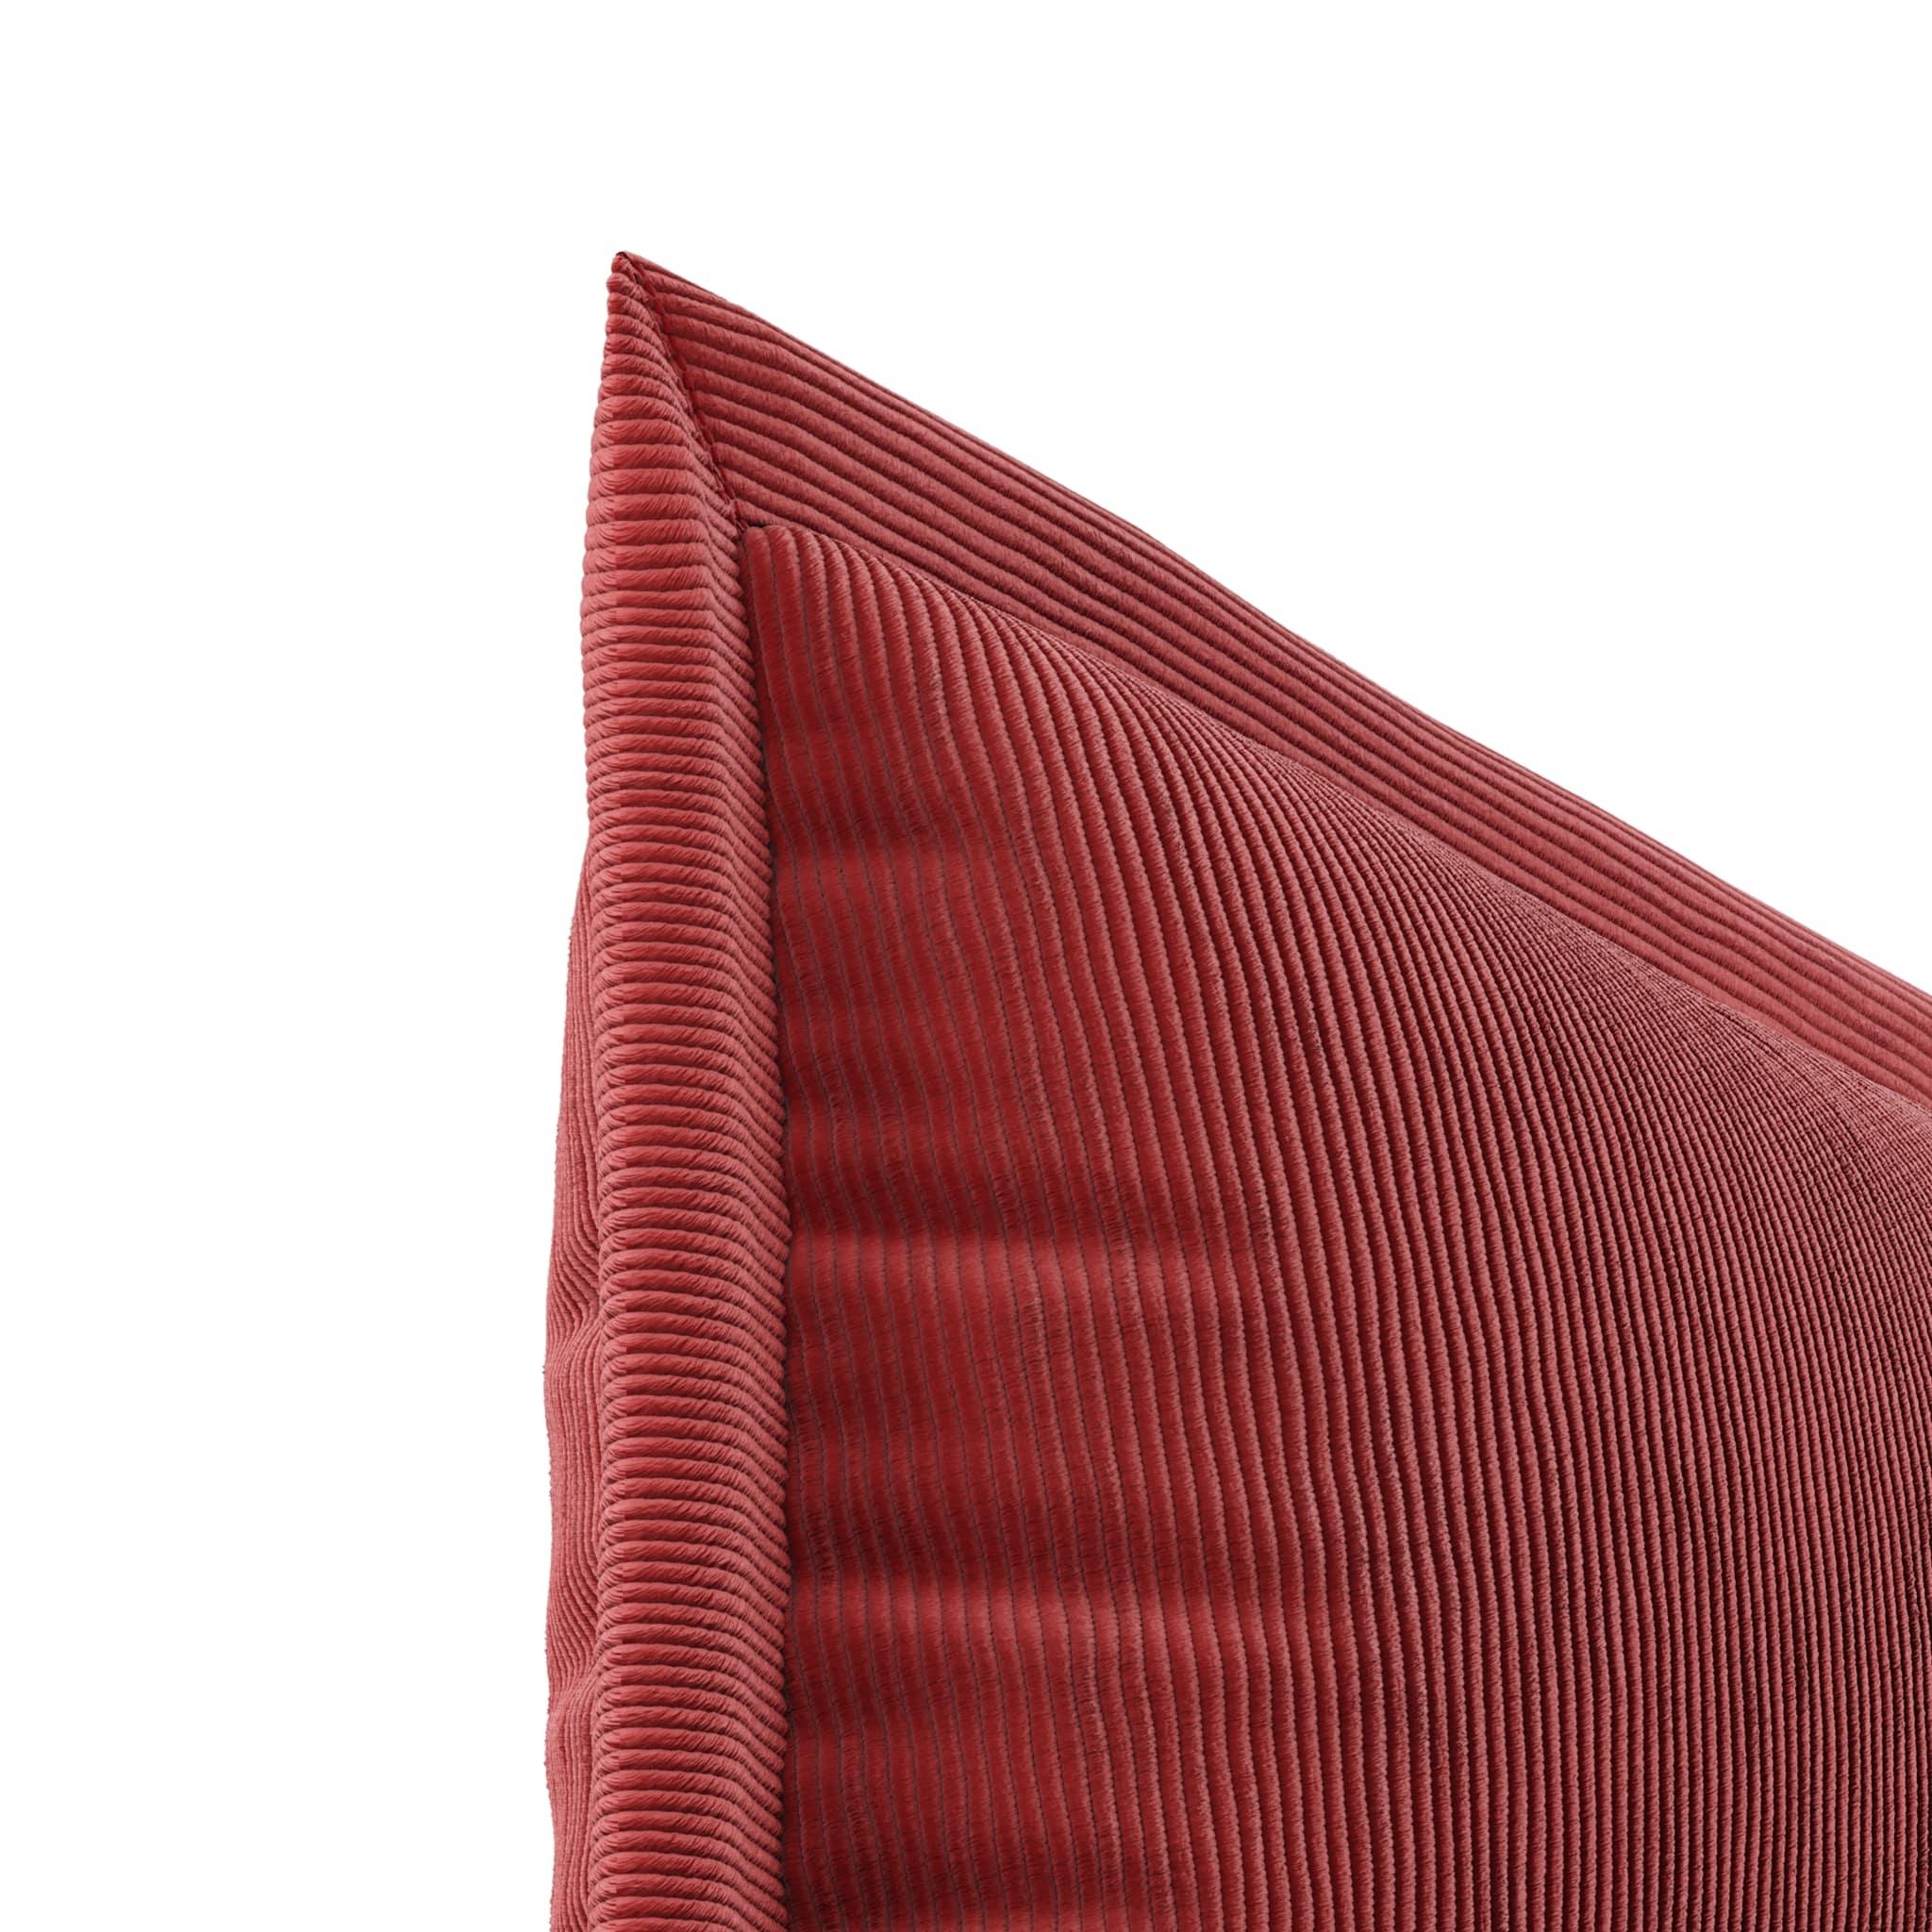 Decorative throw pillow red Corduroy, modern ribbed velvet lumbar cushion.
Red is a rectangular shaped pillow in red corduroy fabric with a sophisticated red flange. The warm and delicate texture of Corduroy Red Rectangle flange pillow will make